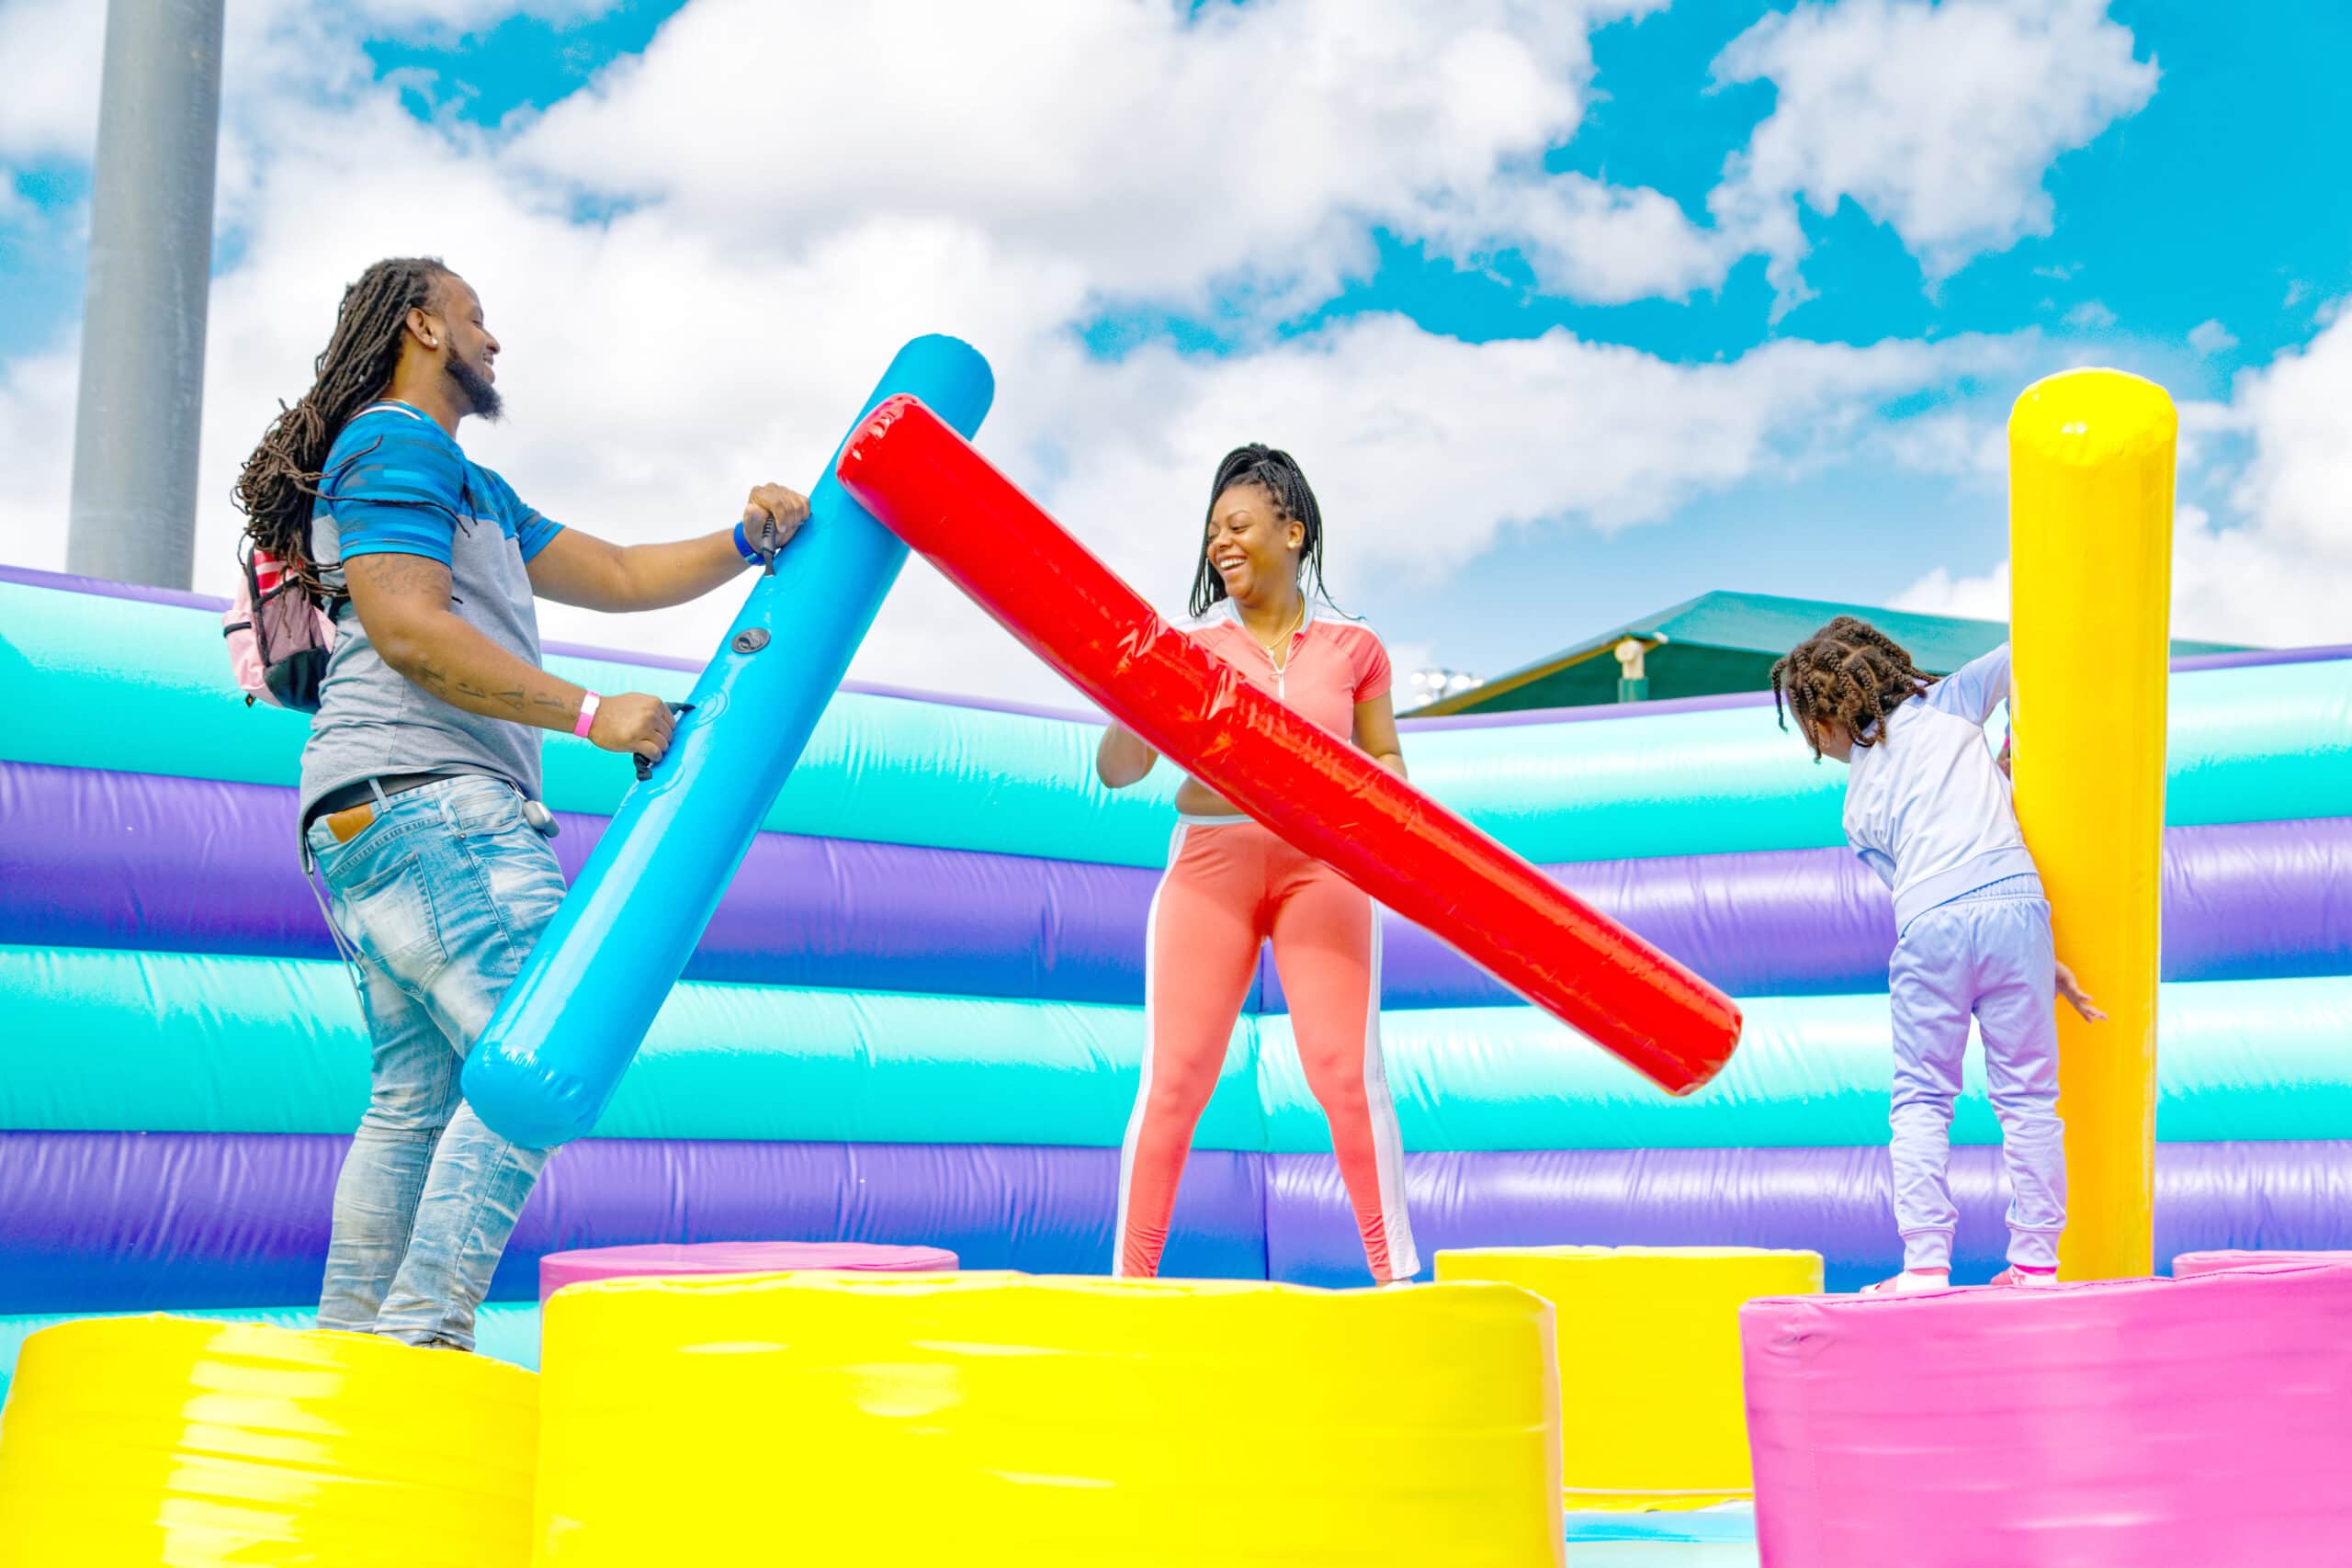 two people battling with inflatables